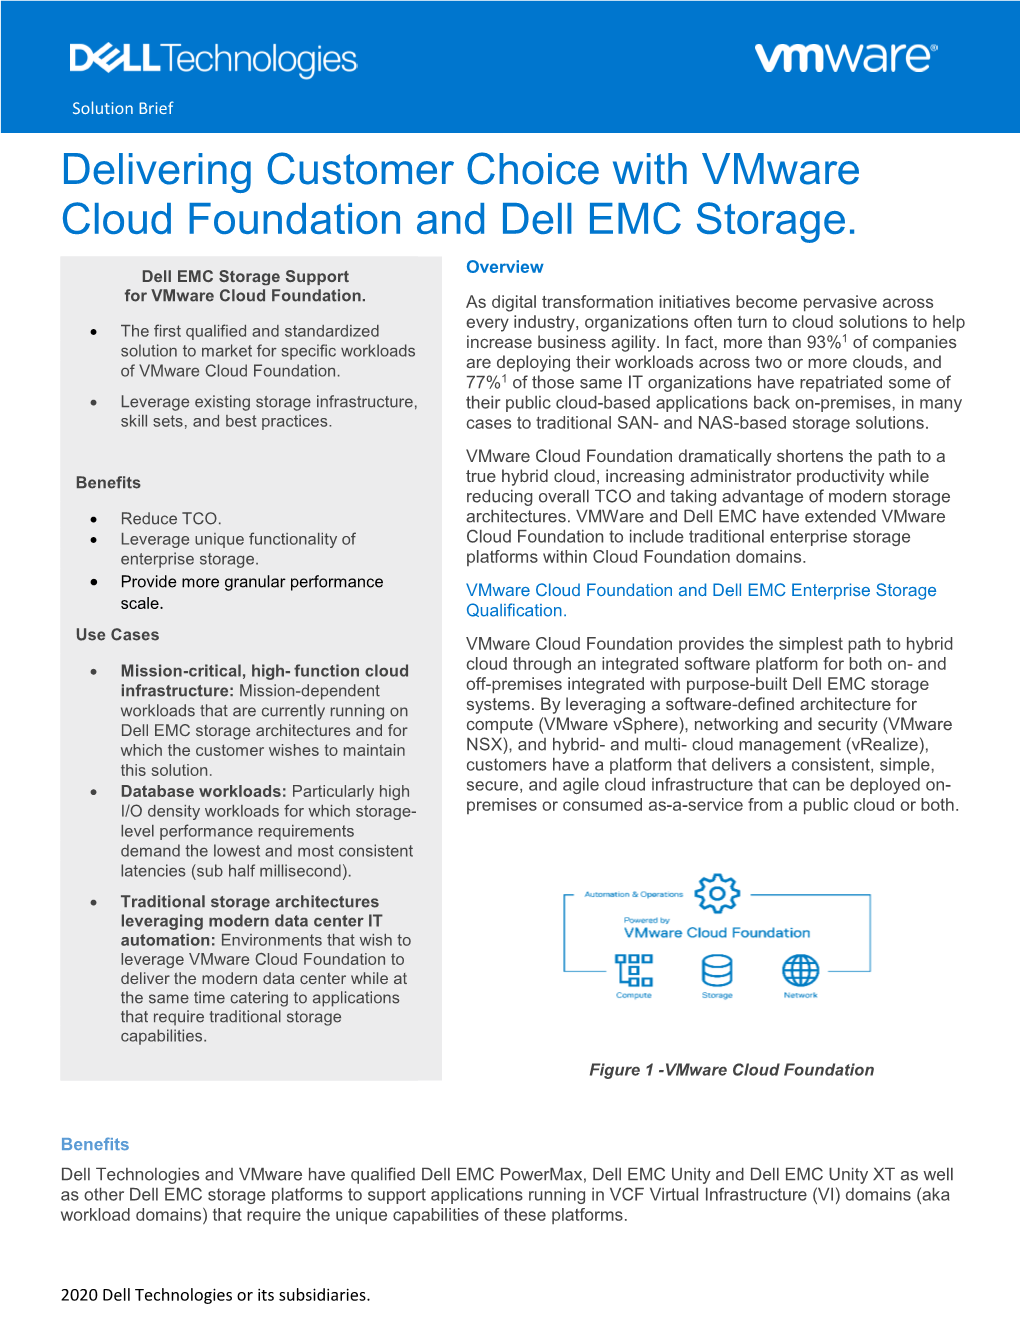 Delivering Customer Choice with Vmware Cloud Foundation and Dell EMC Storage